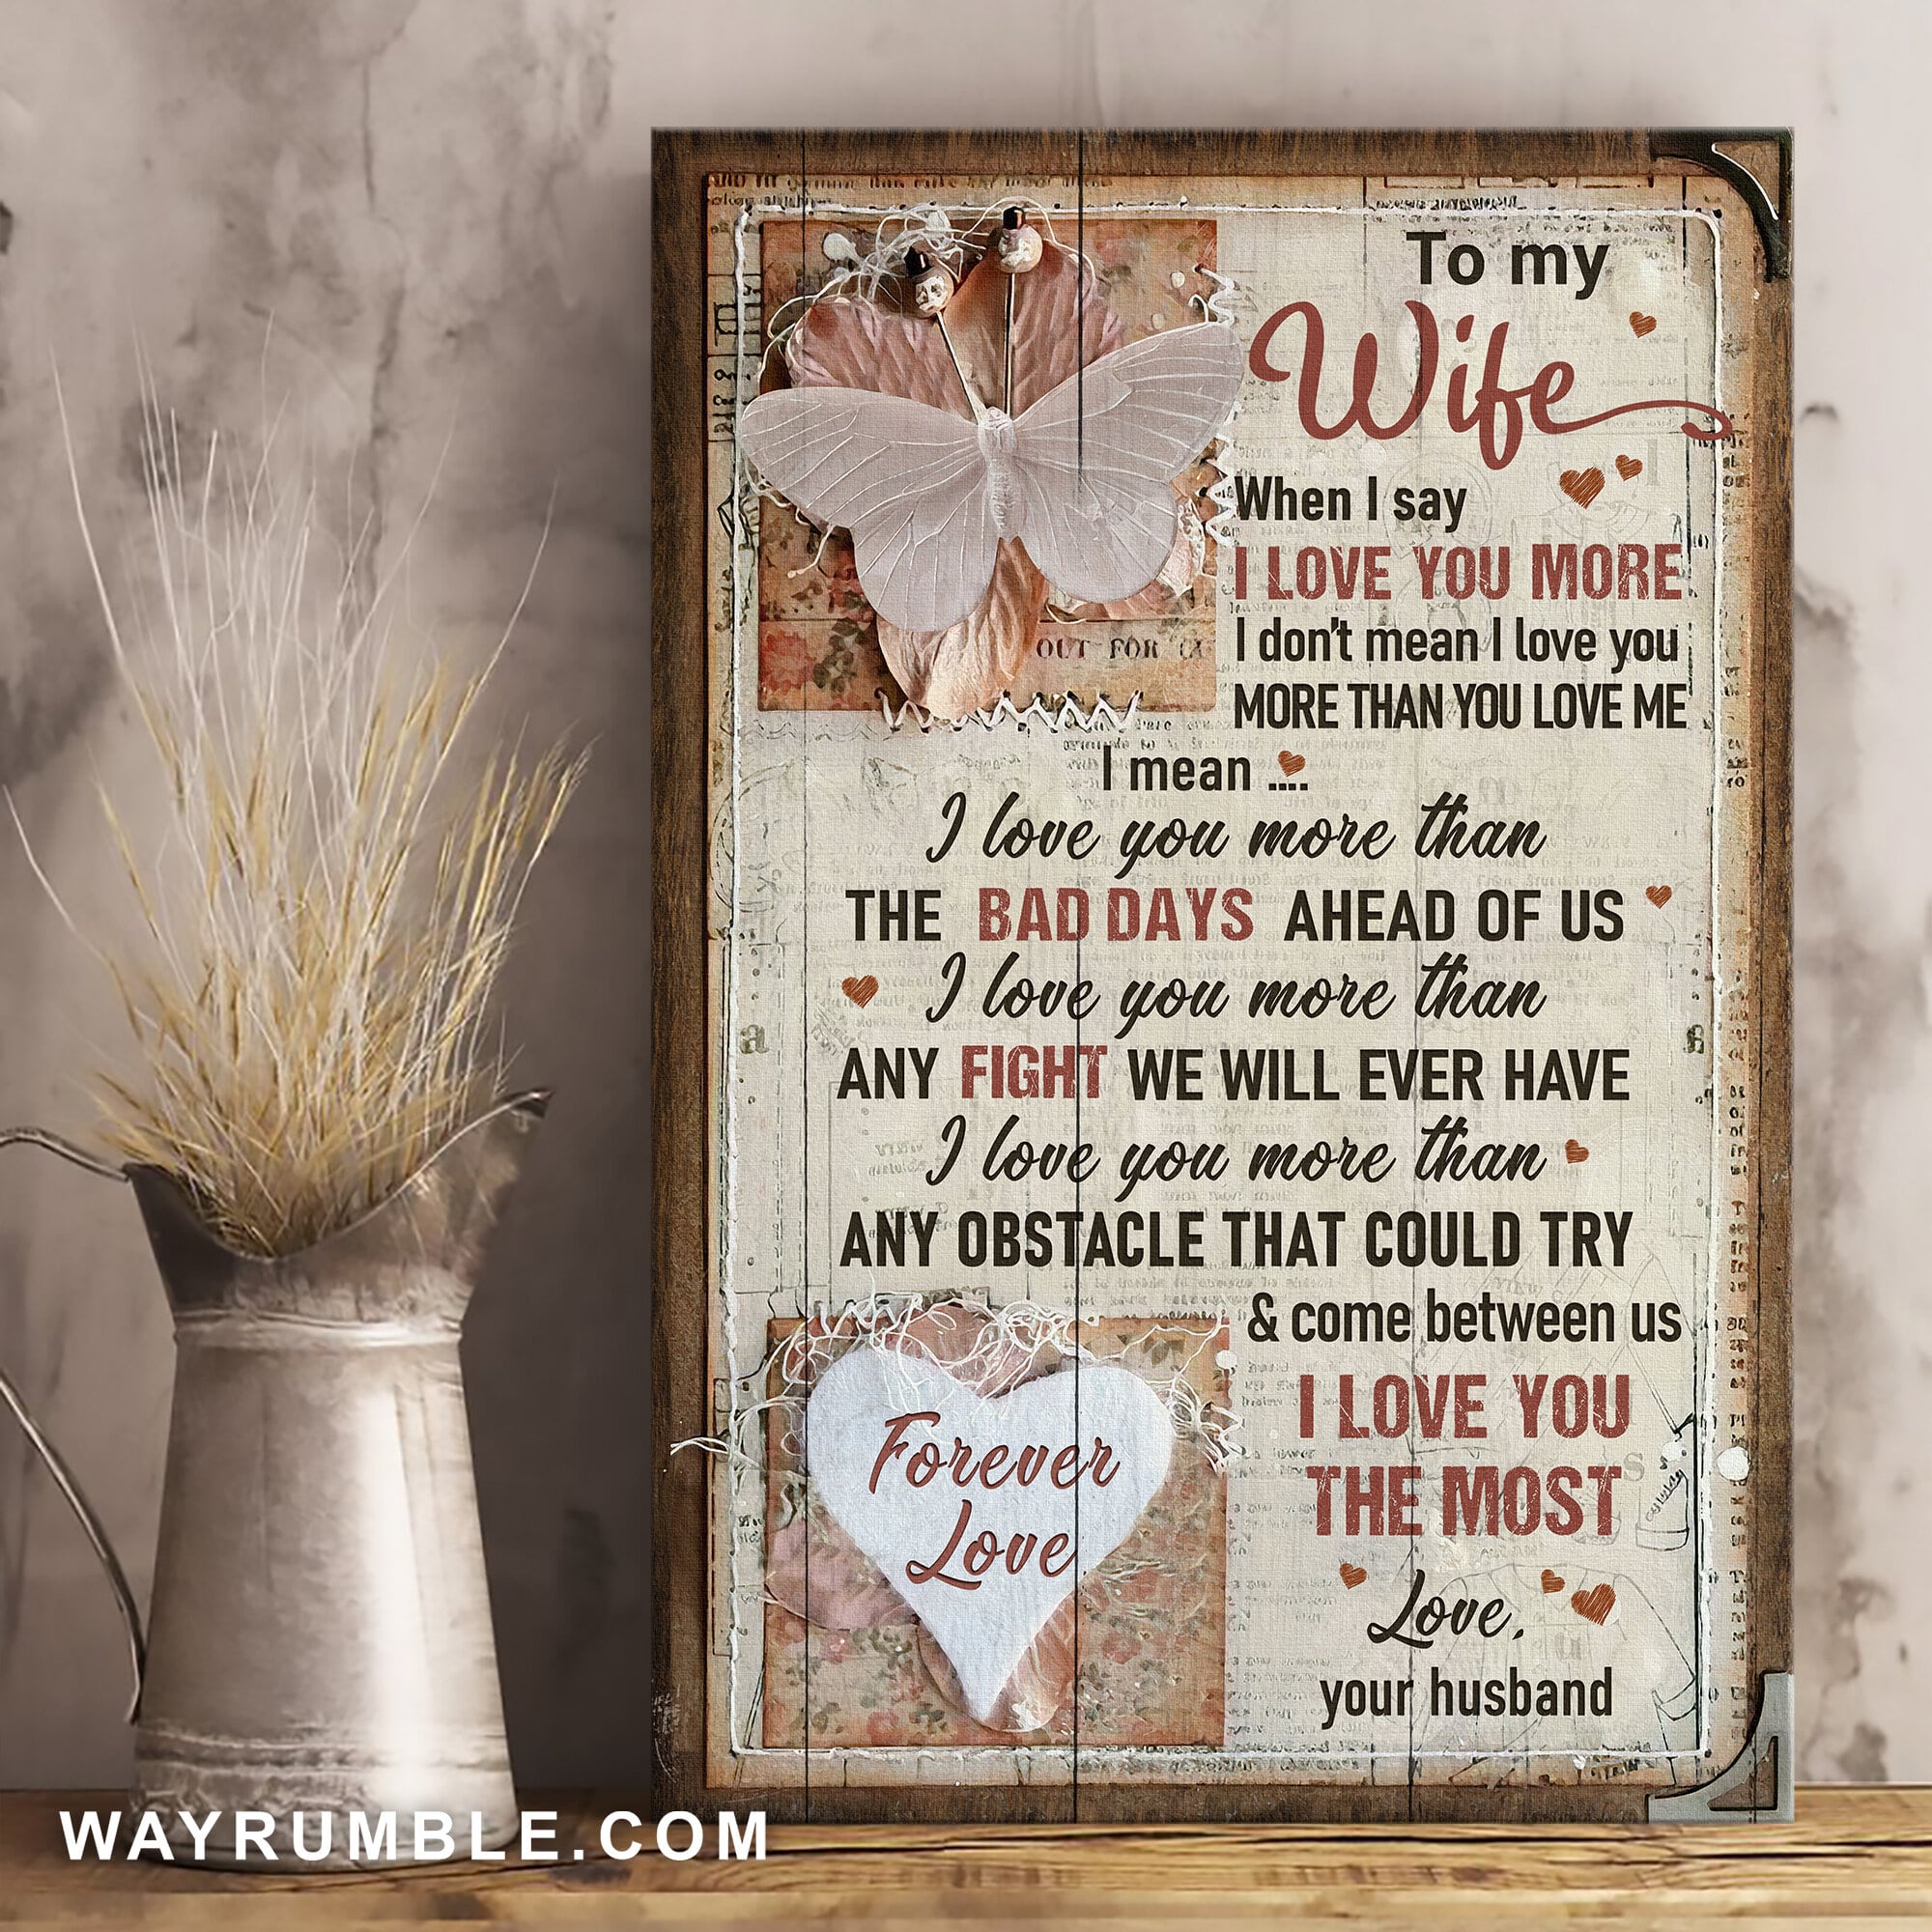 To my wife, Butterfly, Happy marriage, I love you the most - Couple Portrait Canvas Prints, Wall Art